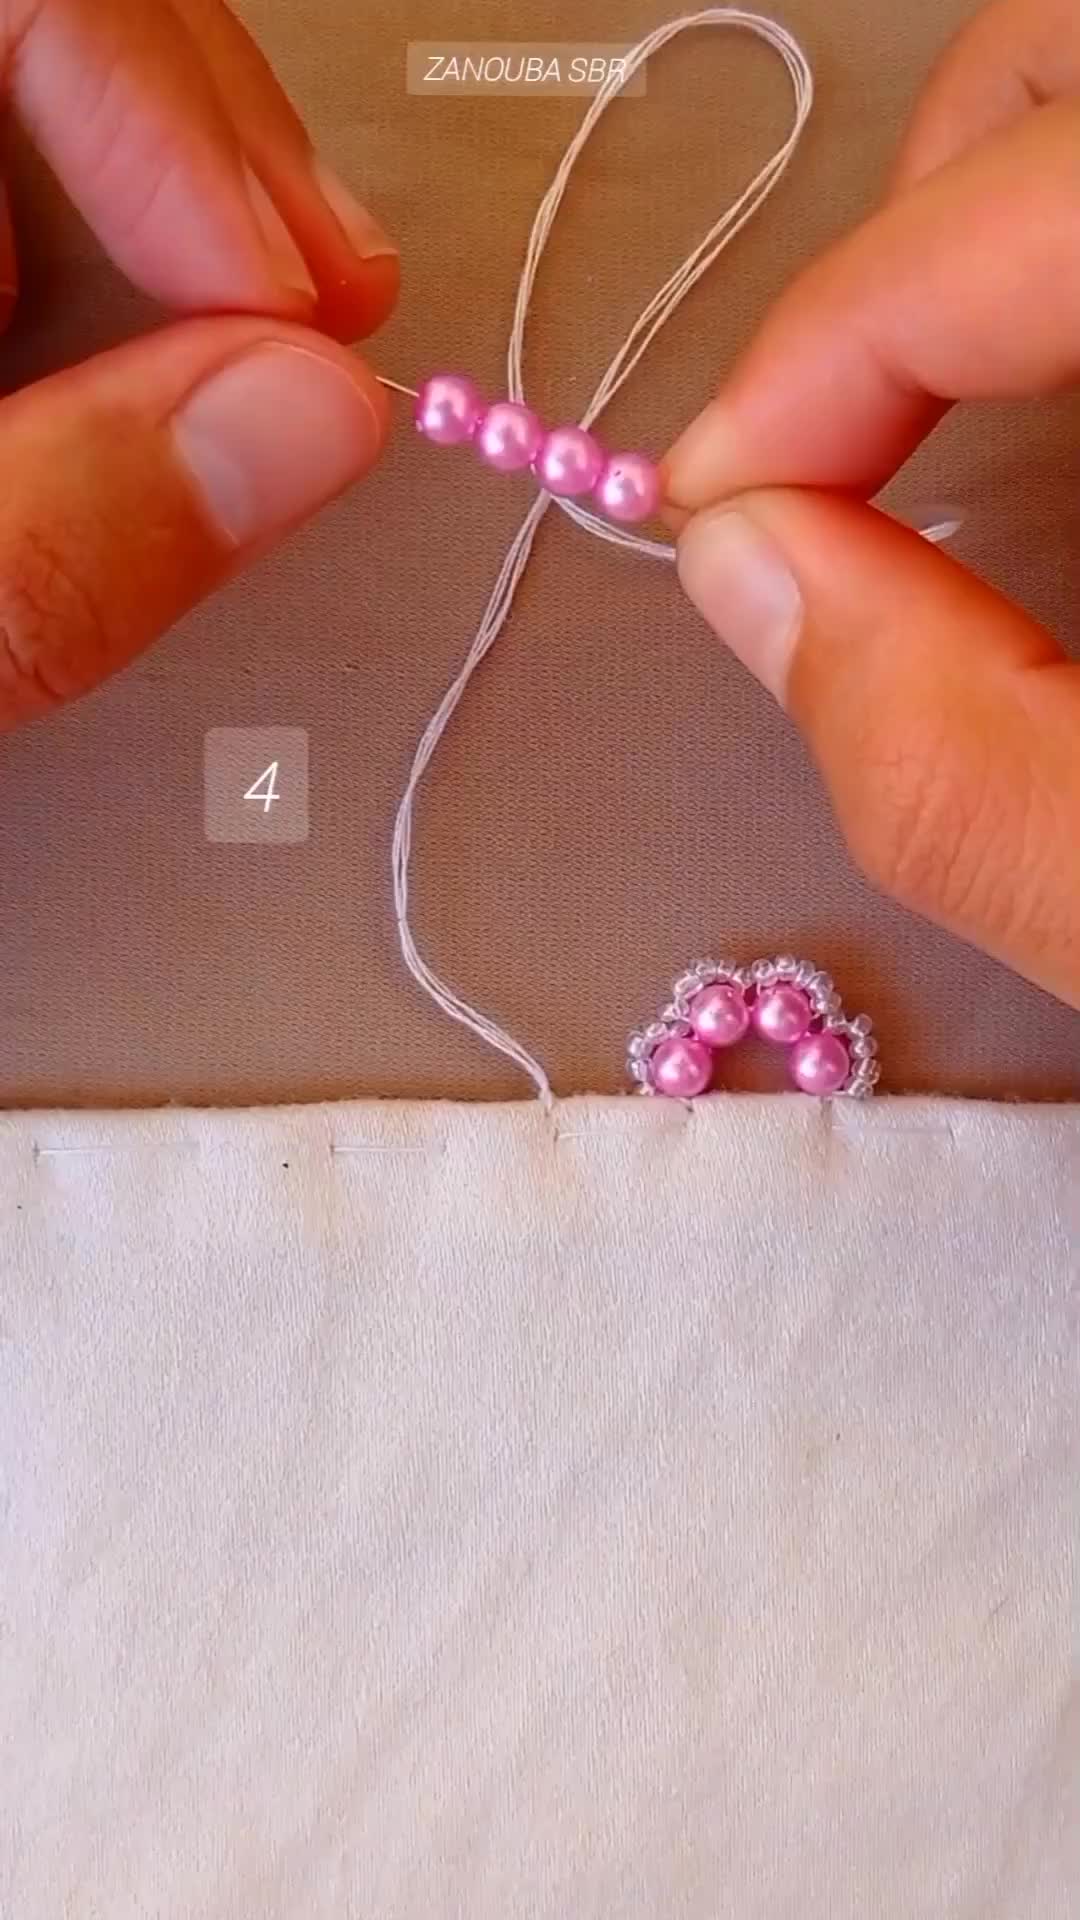 This may contain: two hands are working on some pink beaded beads with white thread, and one hand is holding the string